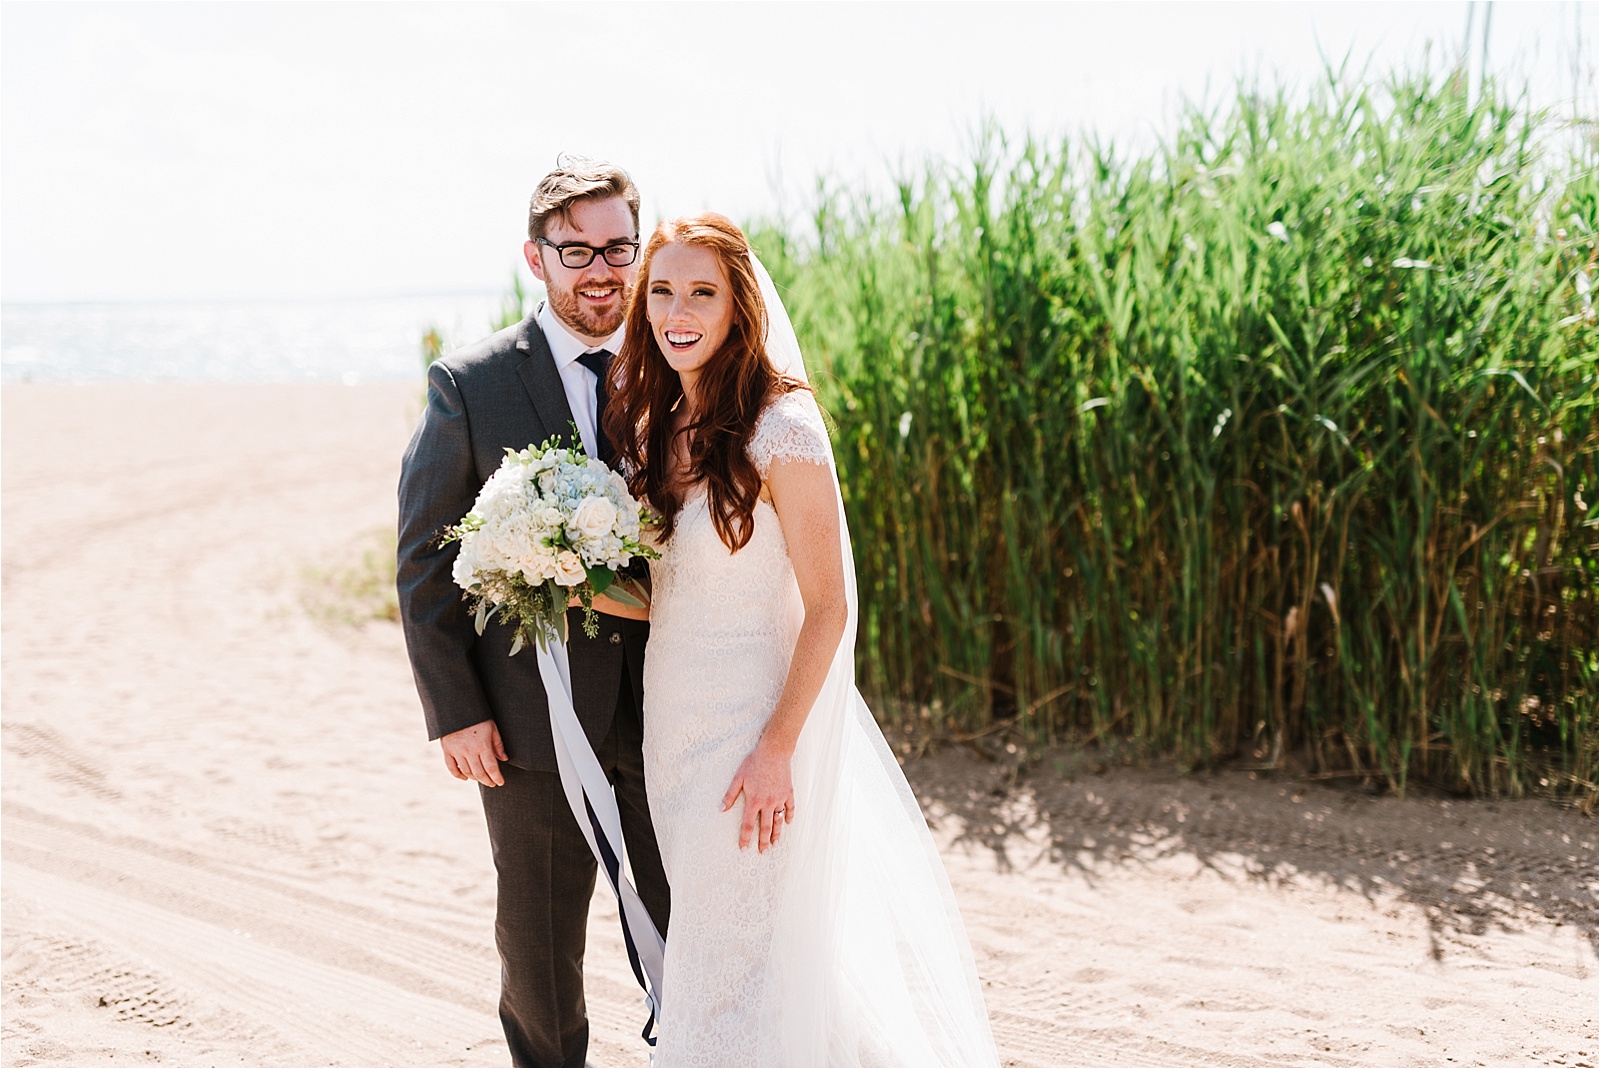 Nautical & Coastal Wedding at Lighthouse Point Park in New Haven, CT by Boston Wedding Photographer Annmarie Swift